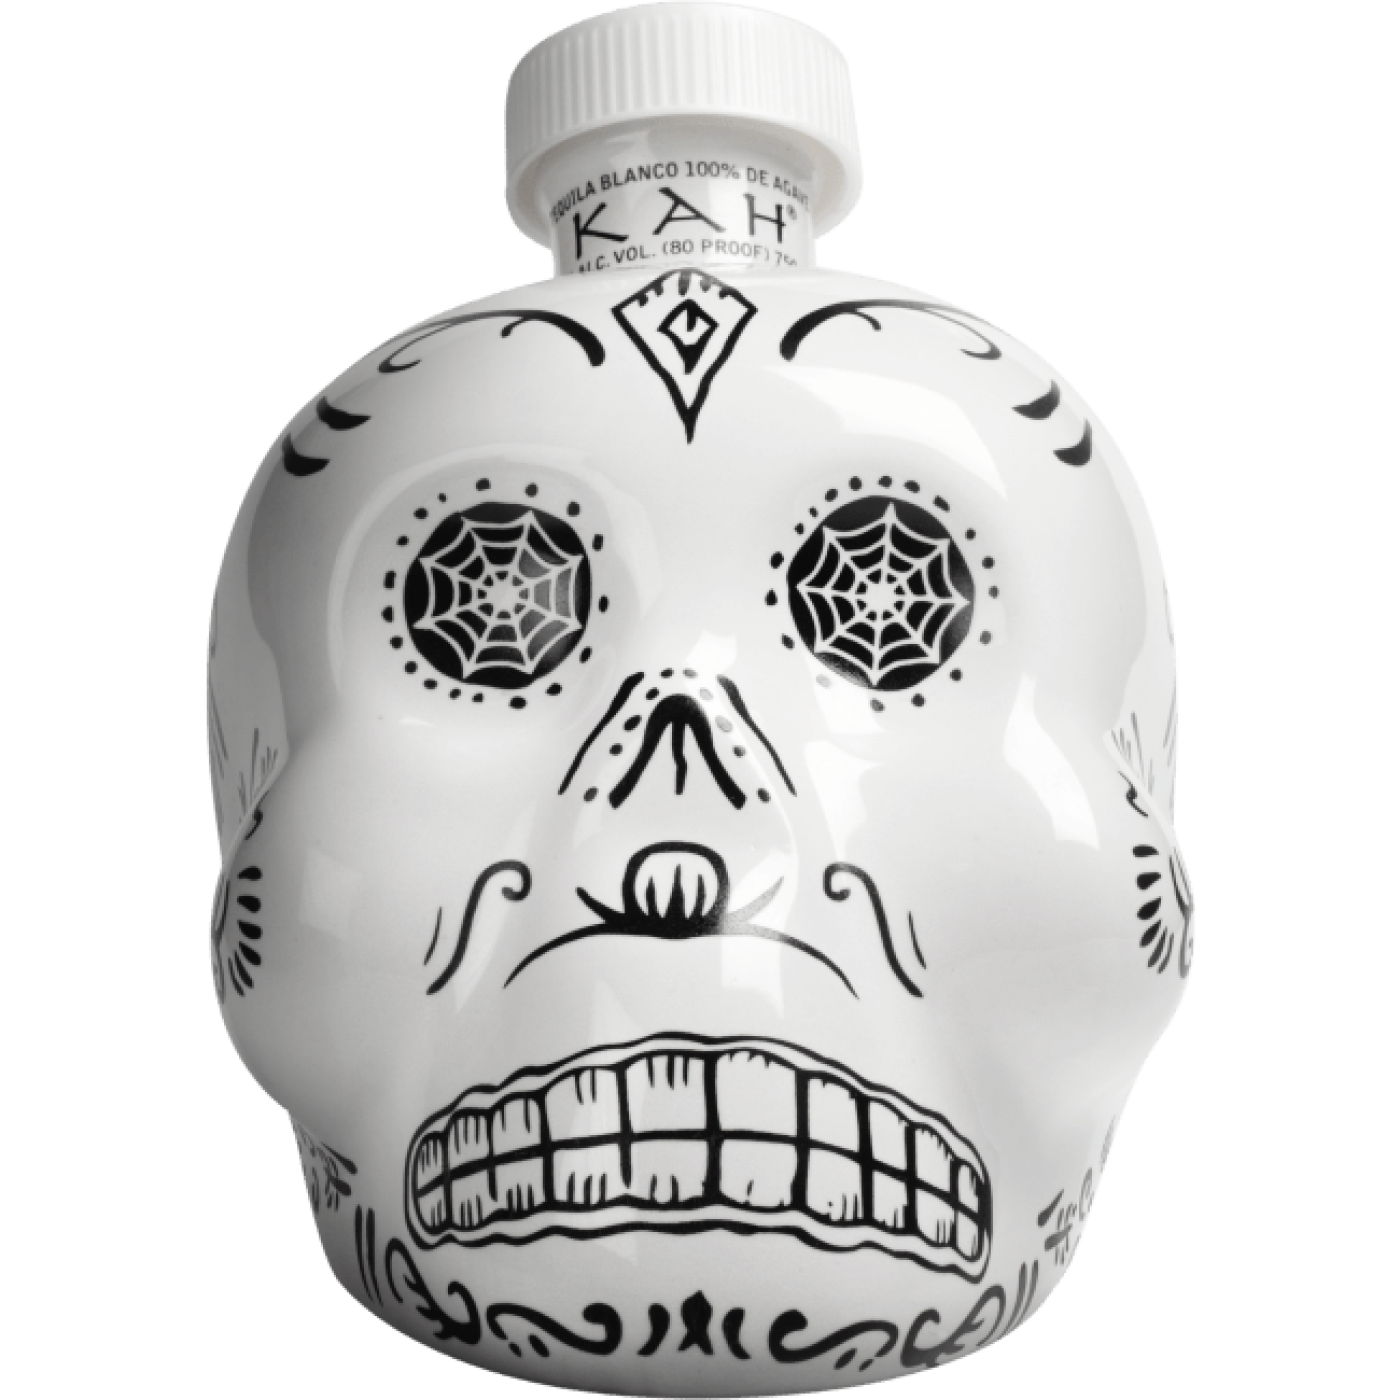 KAH BLANCO MEXICAN TEQUILA